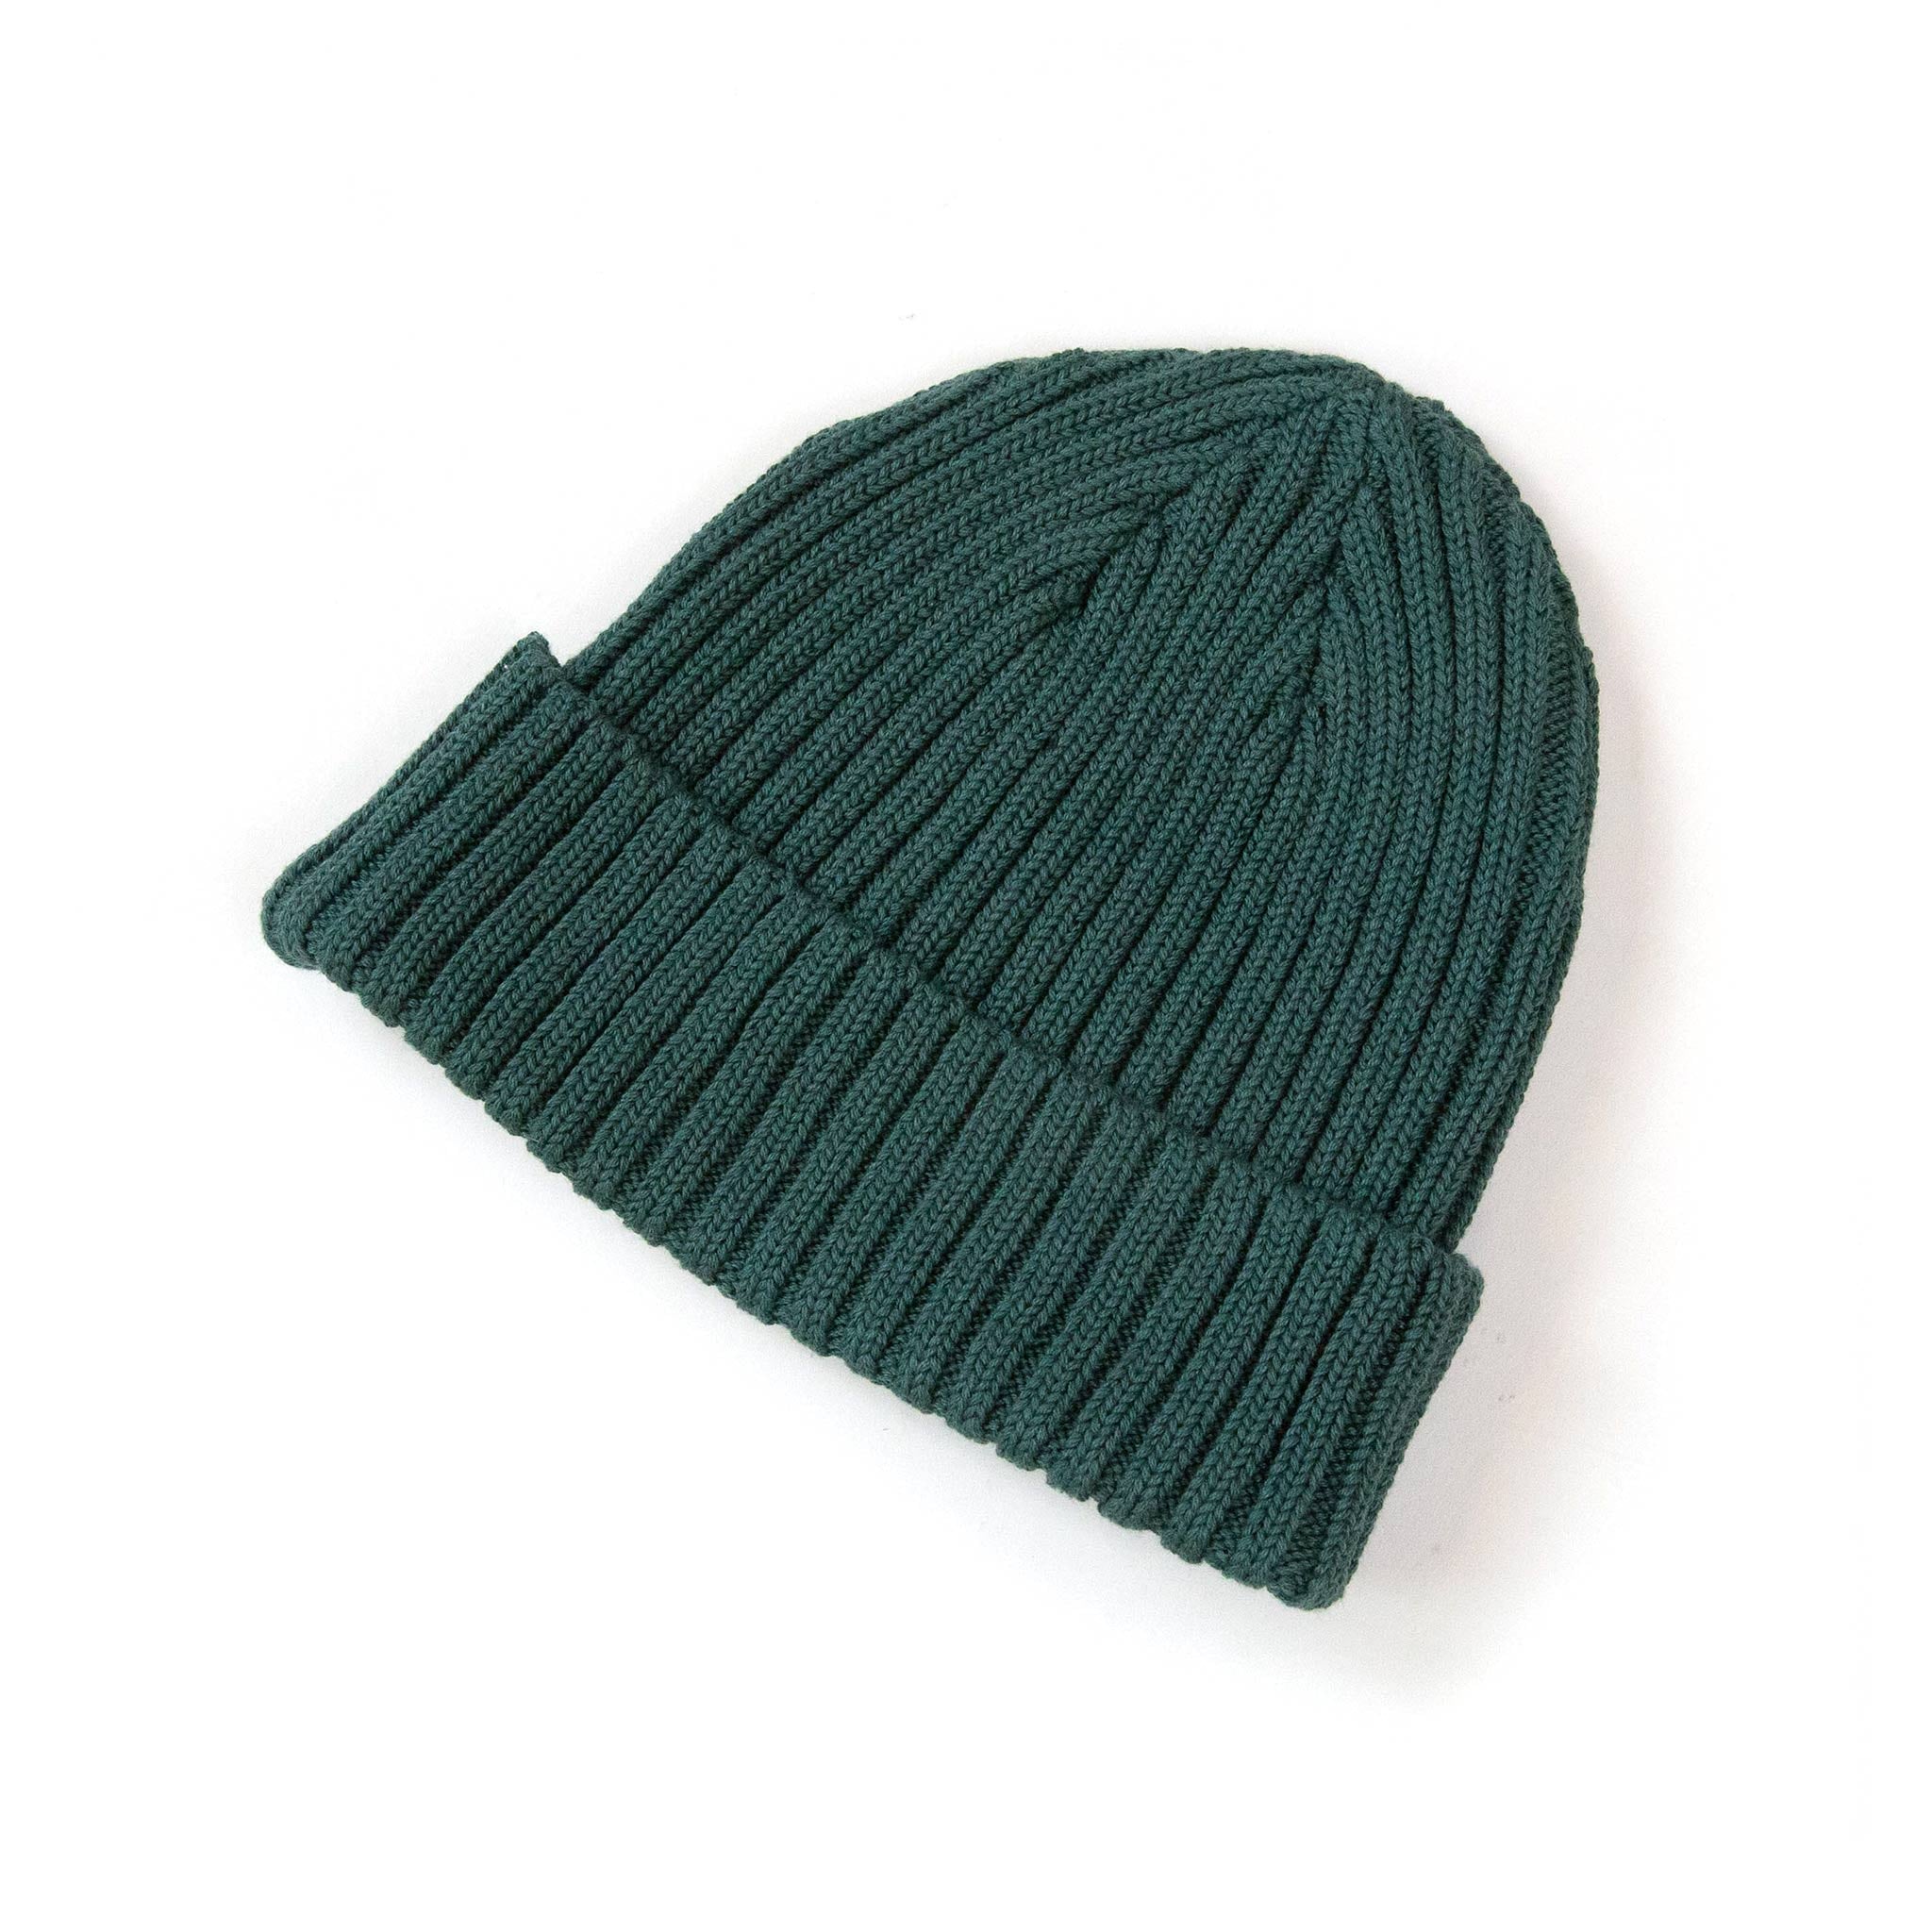 The Real McCoy's MA21014 Cotton Bronson Knit Cap Green Side